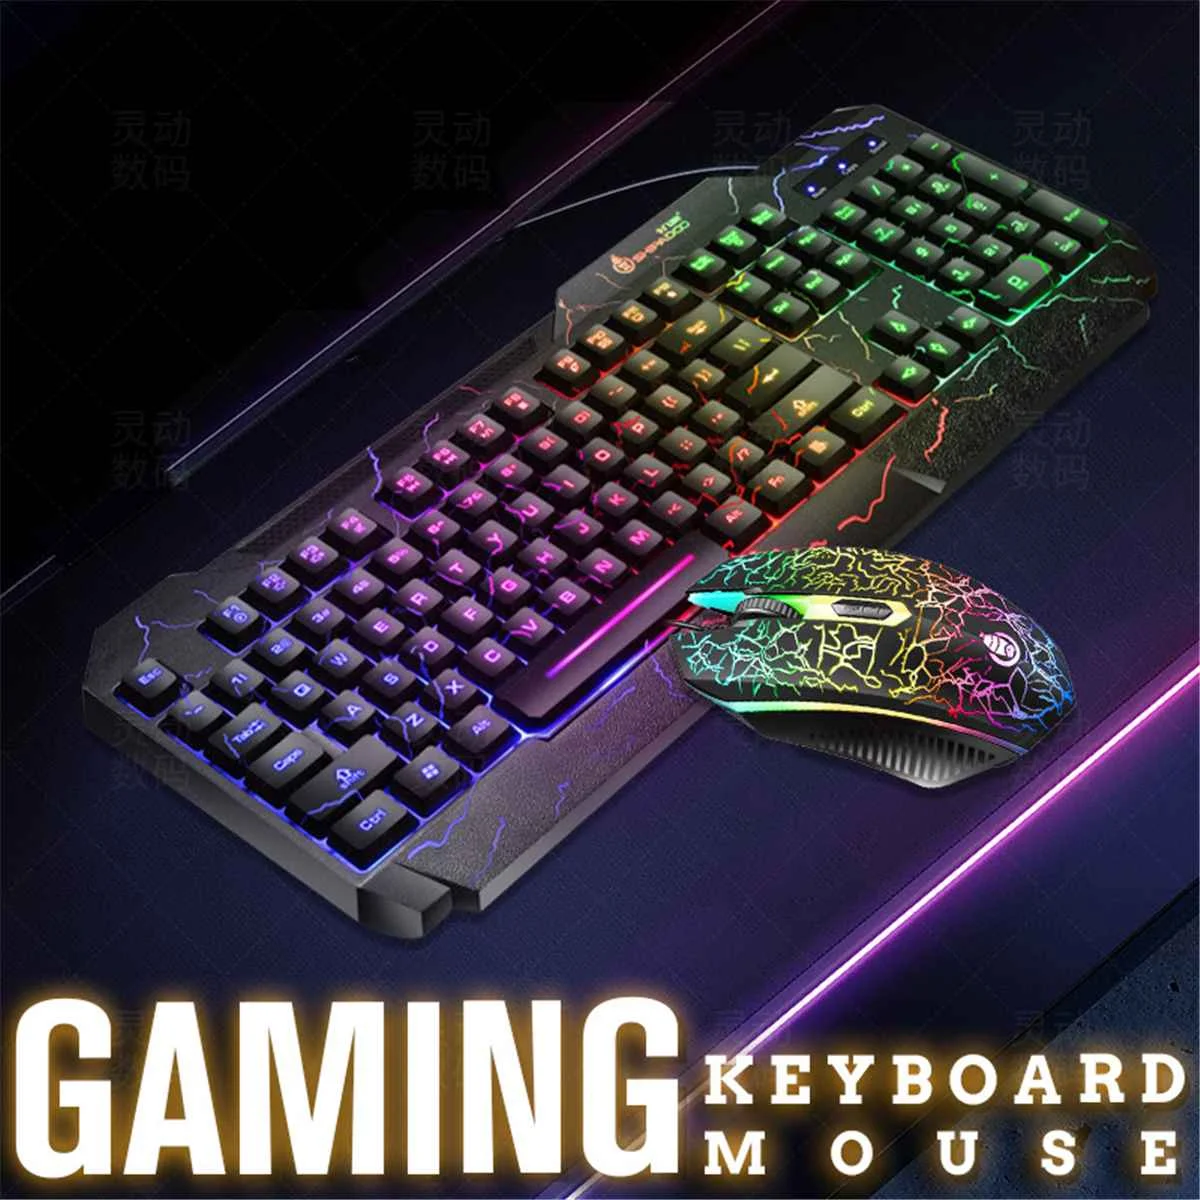 

Wired Gaming Keyboard Mouse Kit 1600dpi Standard 104 key USB LED Backlight keyboard Mouse Gamer Combos with Ergonomic Mause D620